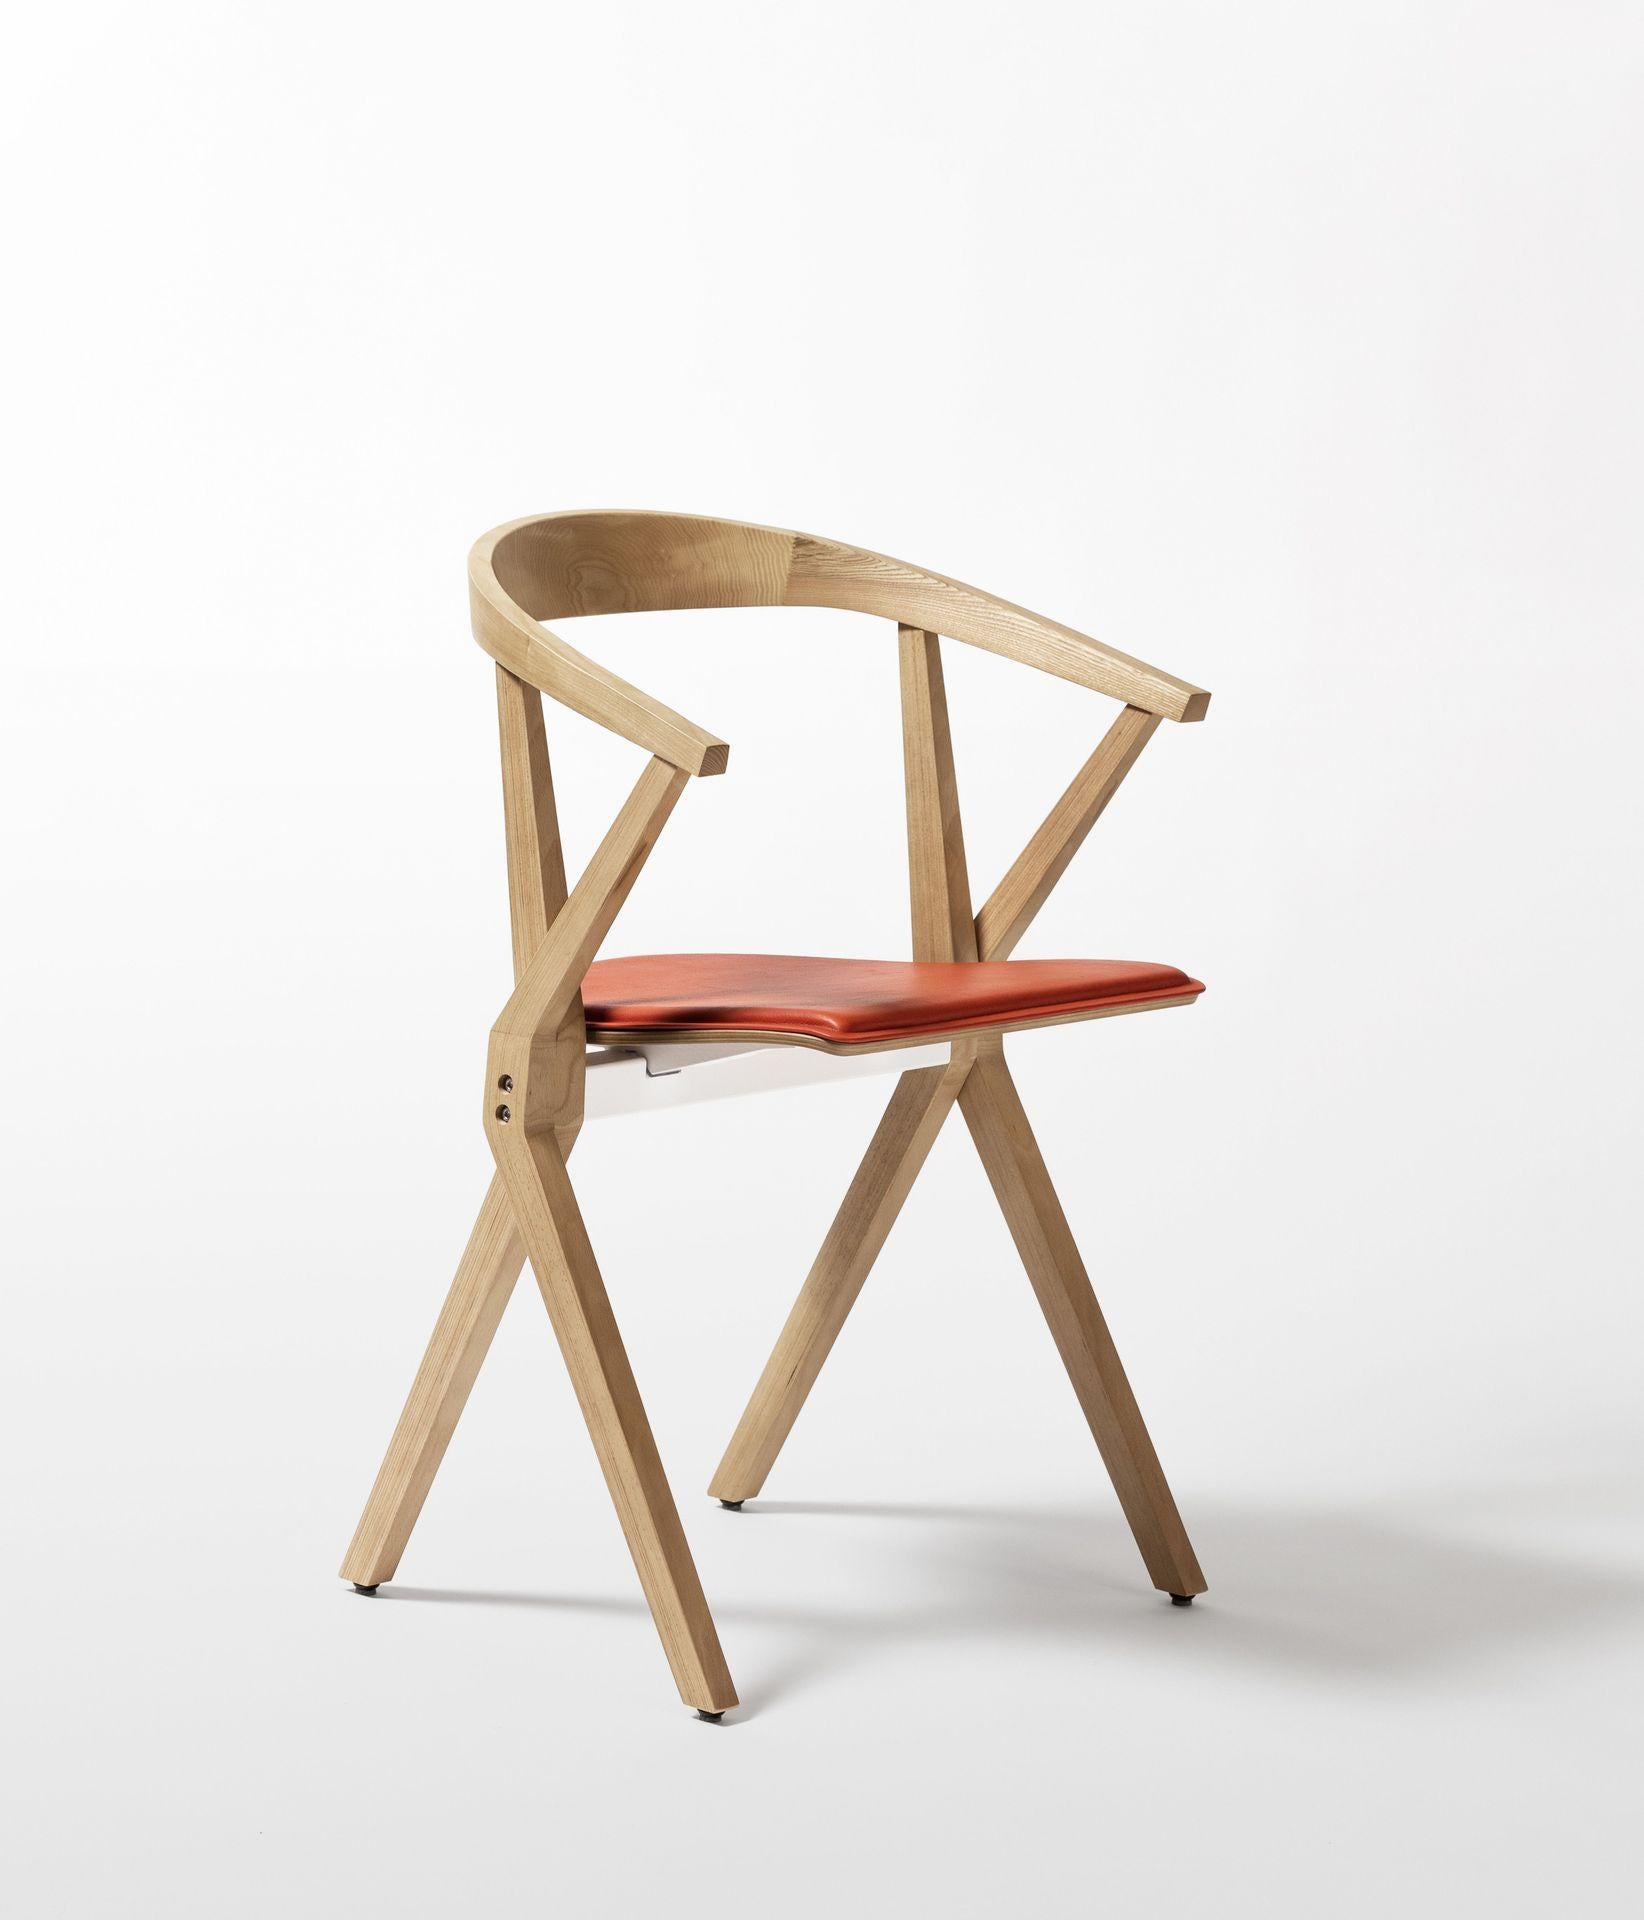 Chair B orange lacquered ash by Konstantin Grcic
Dimensions: D 48 x W 56 x H 77 cm 
Materials: The lateral sides and upper side of the seat are made of veneered beech plywood. The underside is veneered in ash wood. The backrest is made of solid